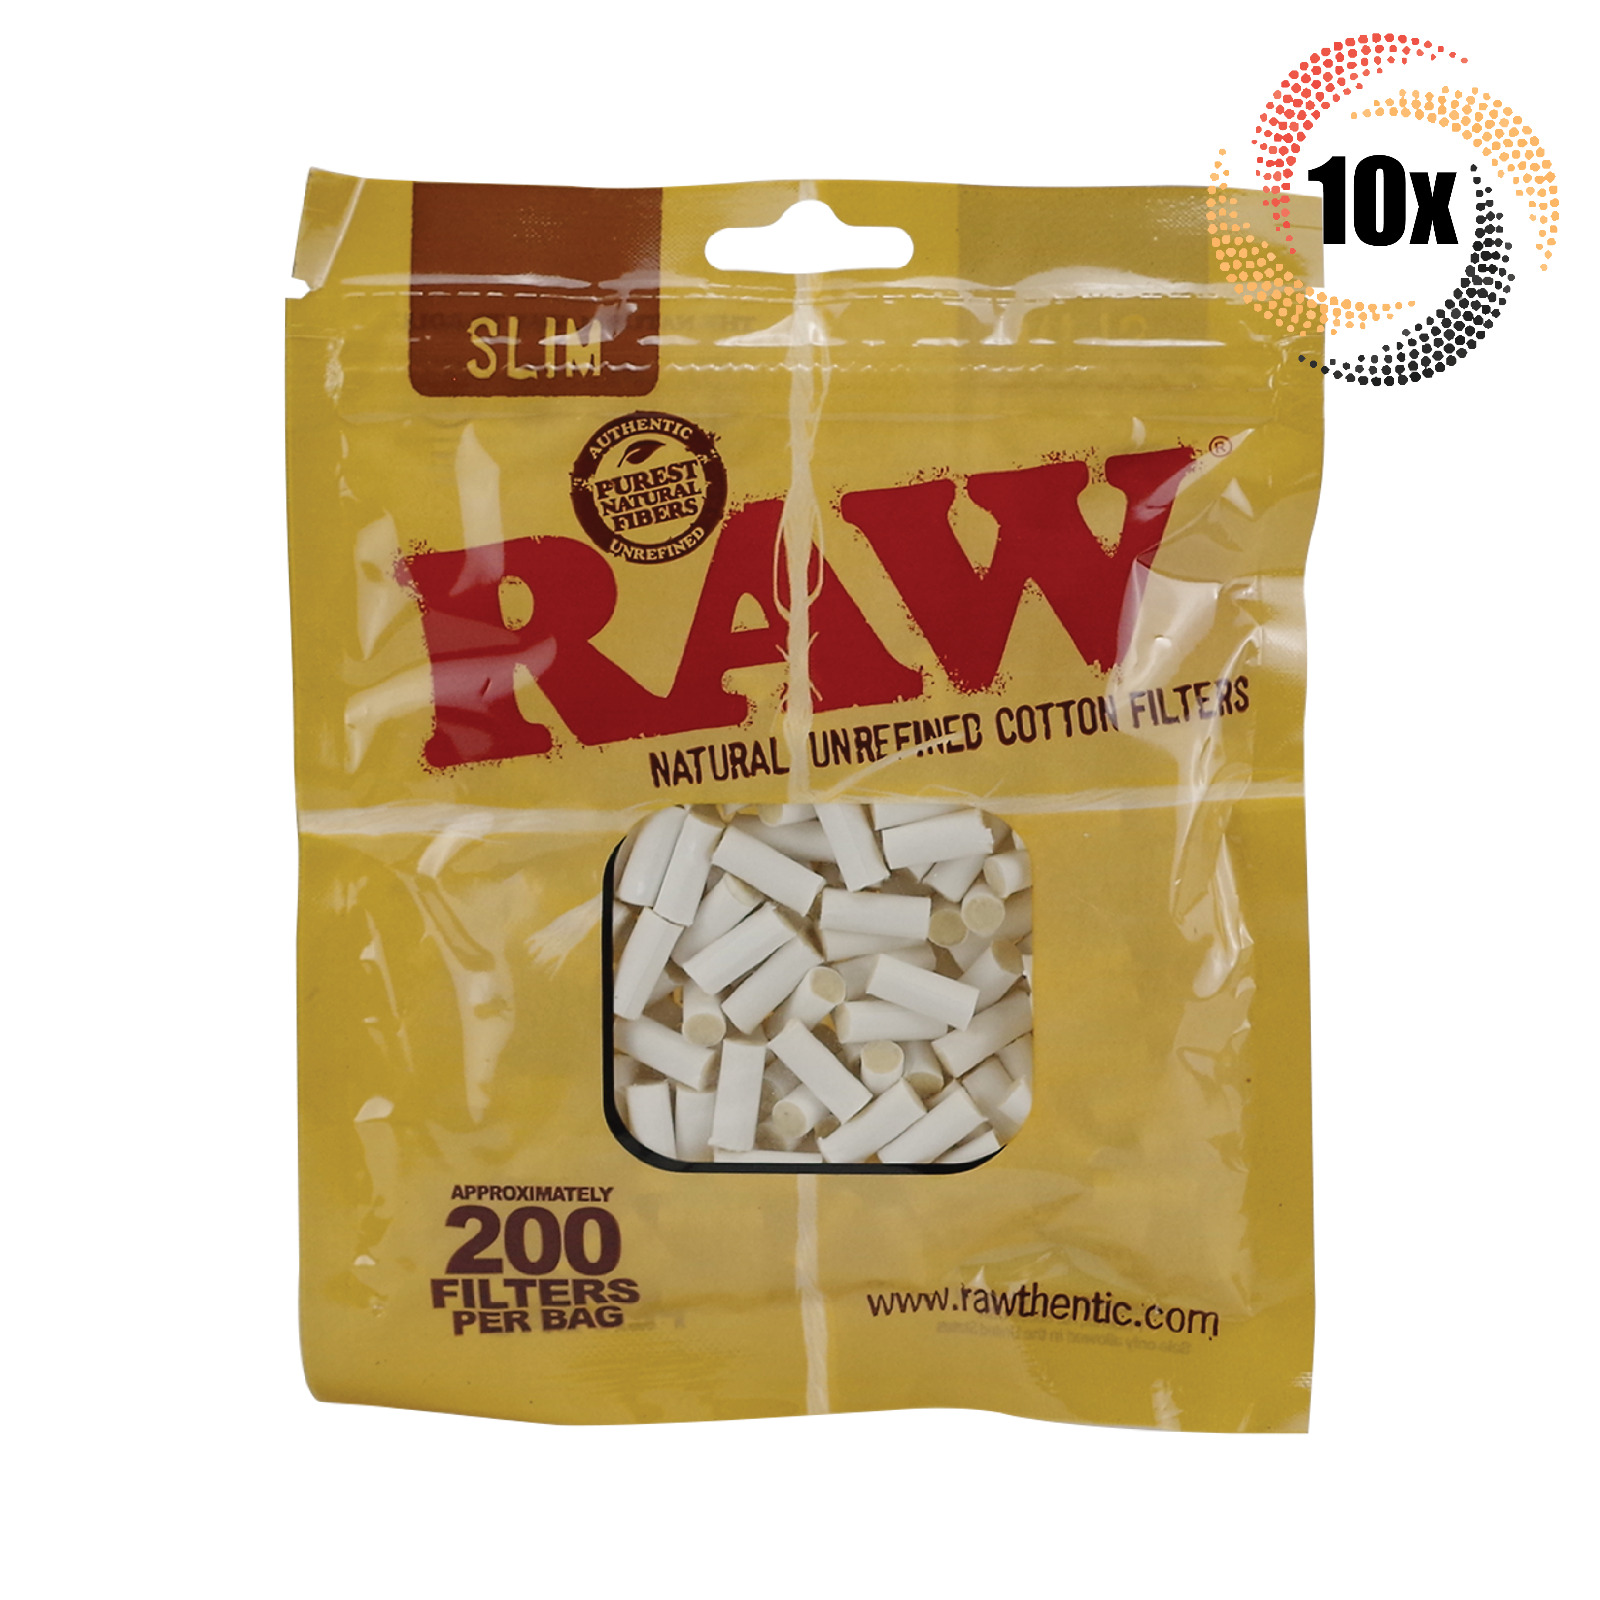 10x Bags Raw Unrefined Natural Slim Cotton Filters | 200 Per Bag | 2 Free Tubes